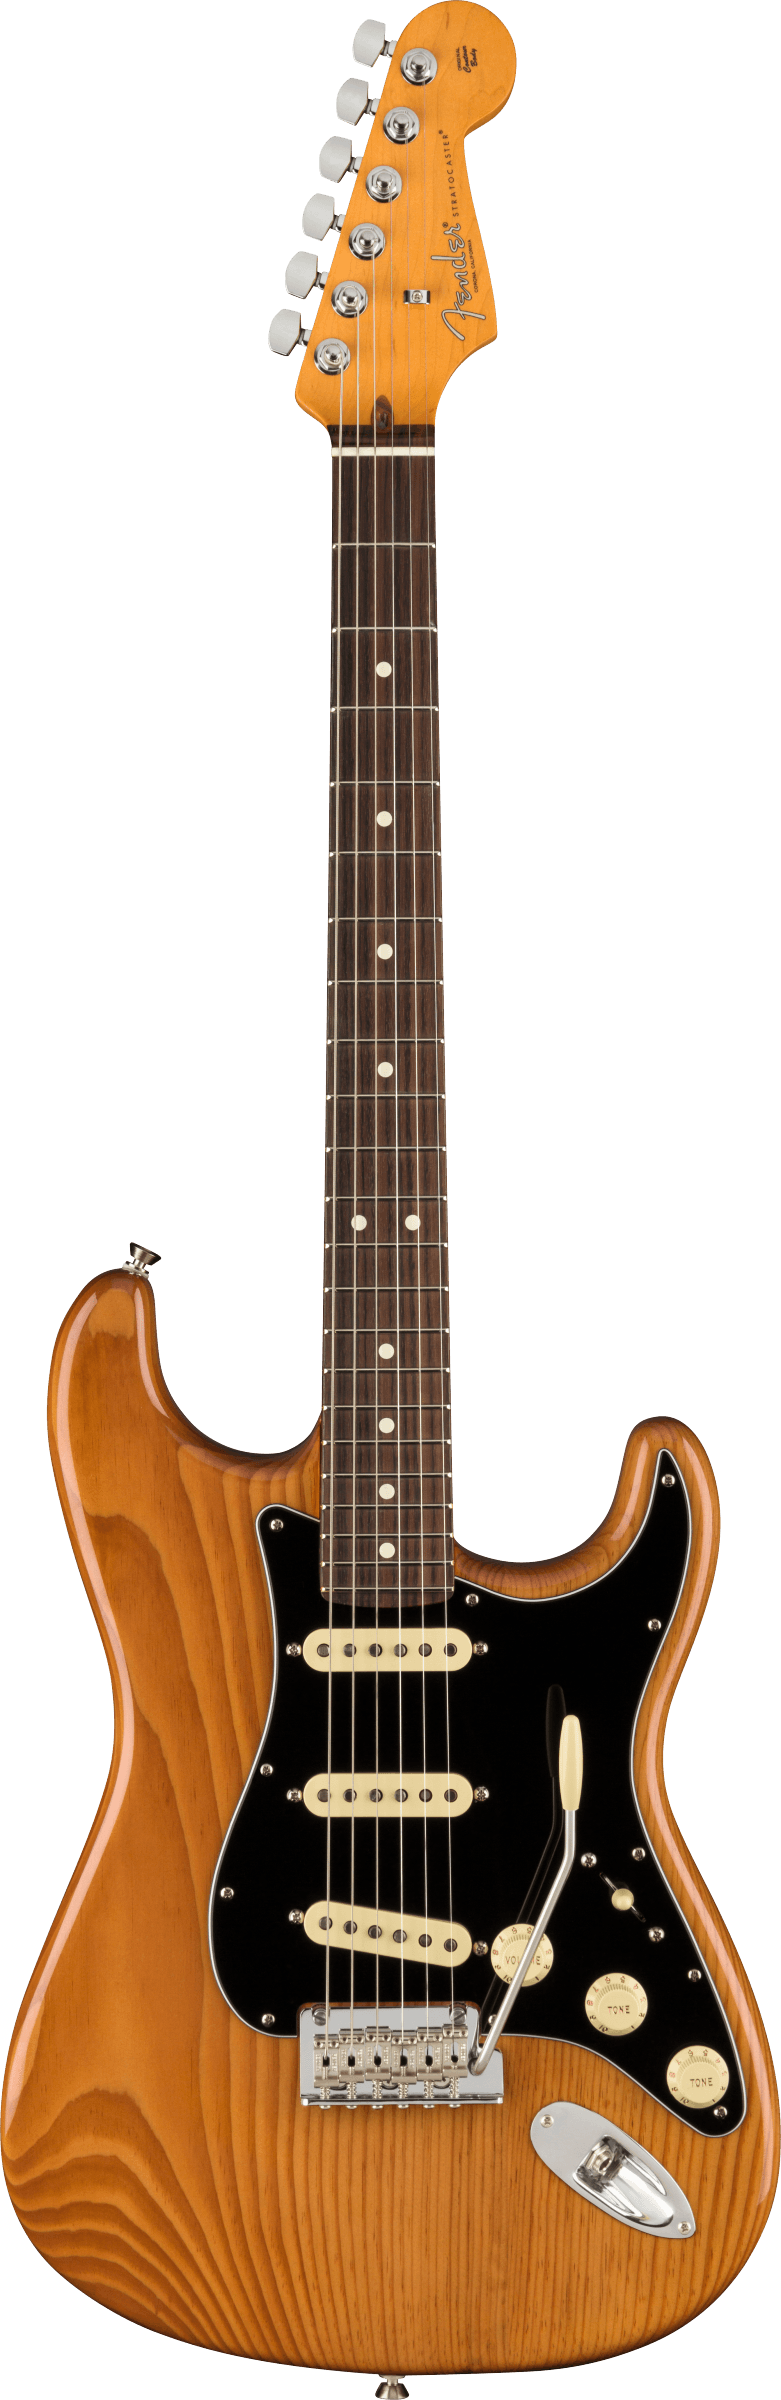 American Professional II Stratocaster Rosewood Fingerboard, Roasted Pine